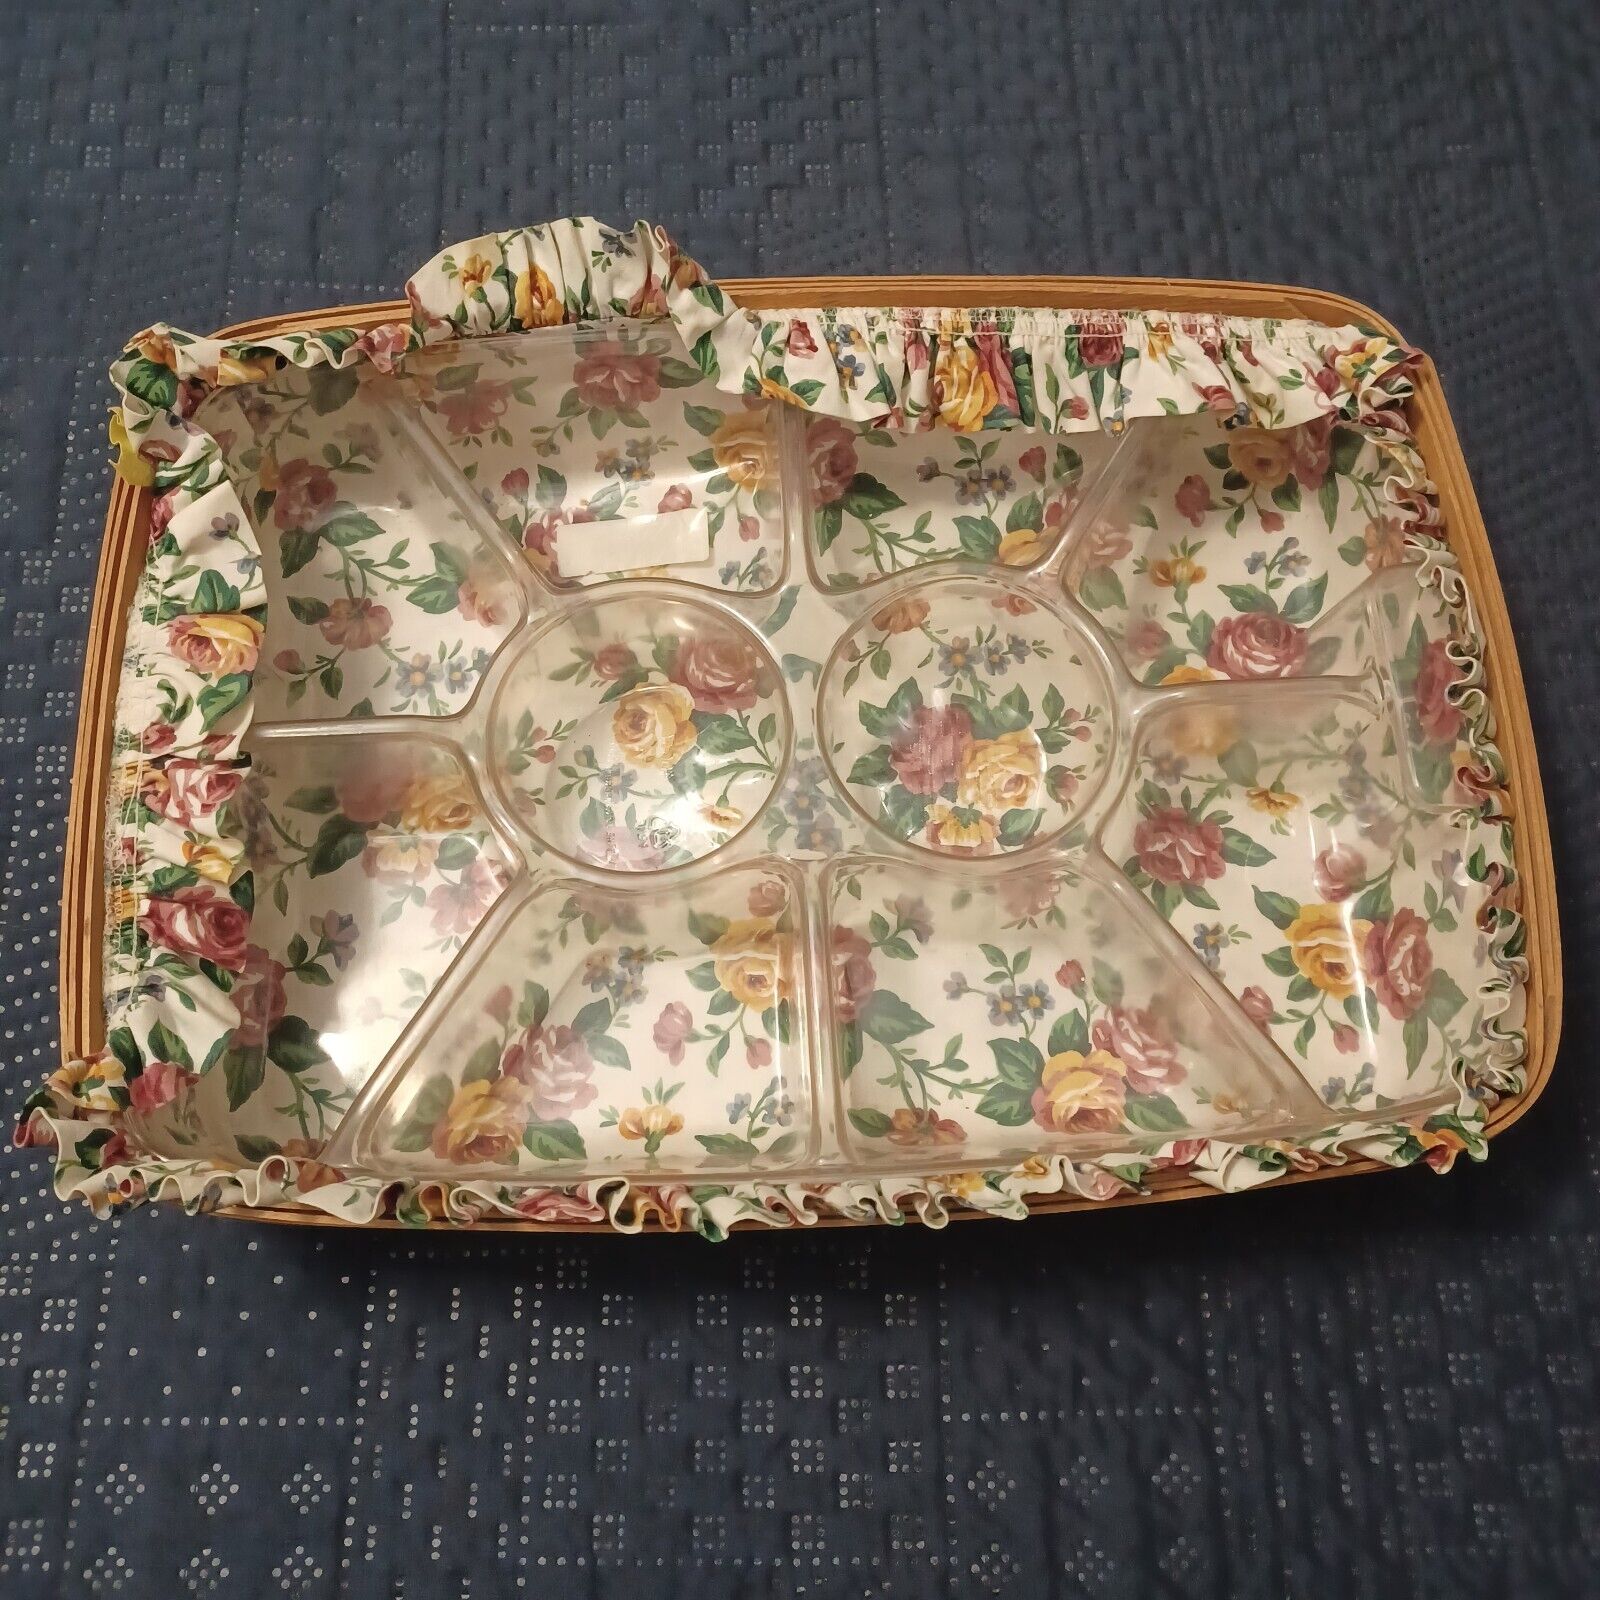 Longaberger 1995 Hand Woven Basket Fabric Liner Plastic Protector 19 x 13 x 4 US